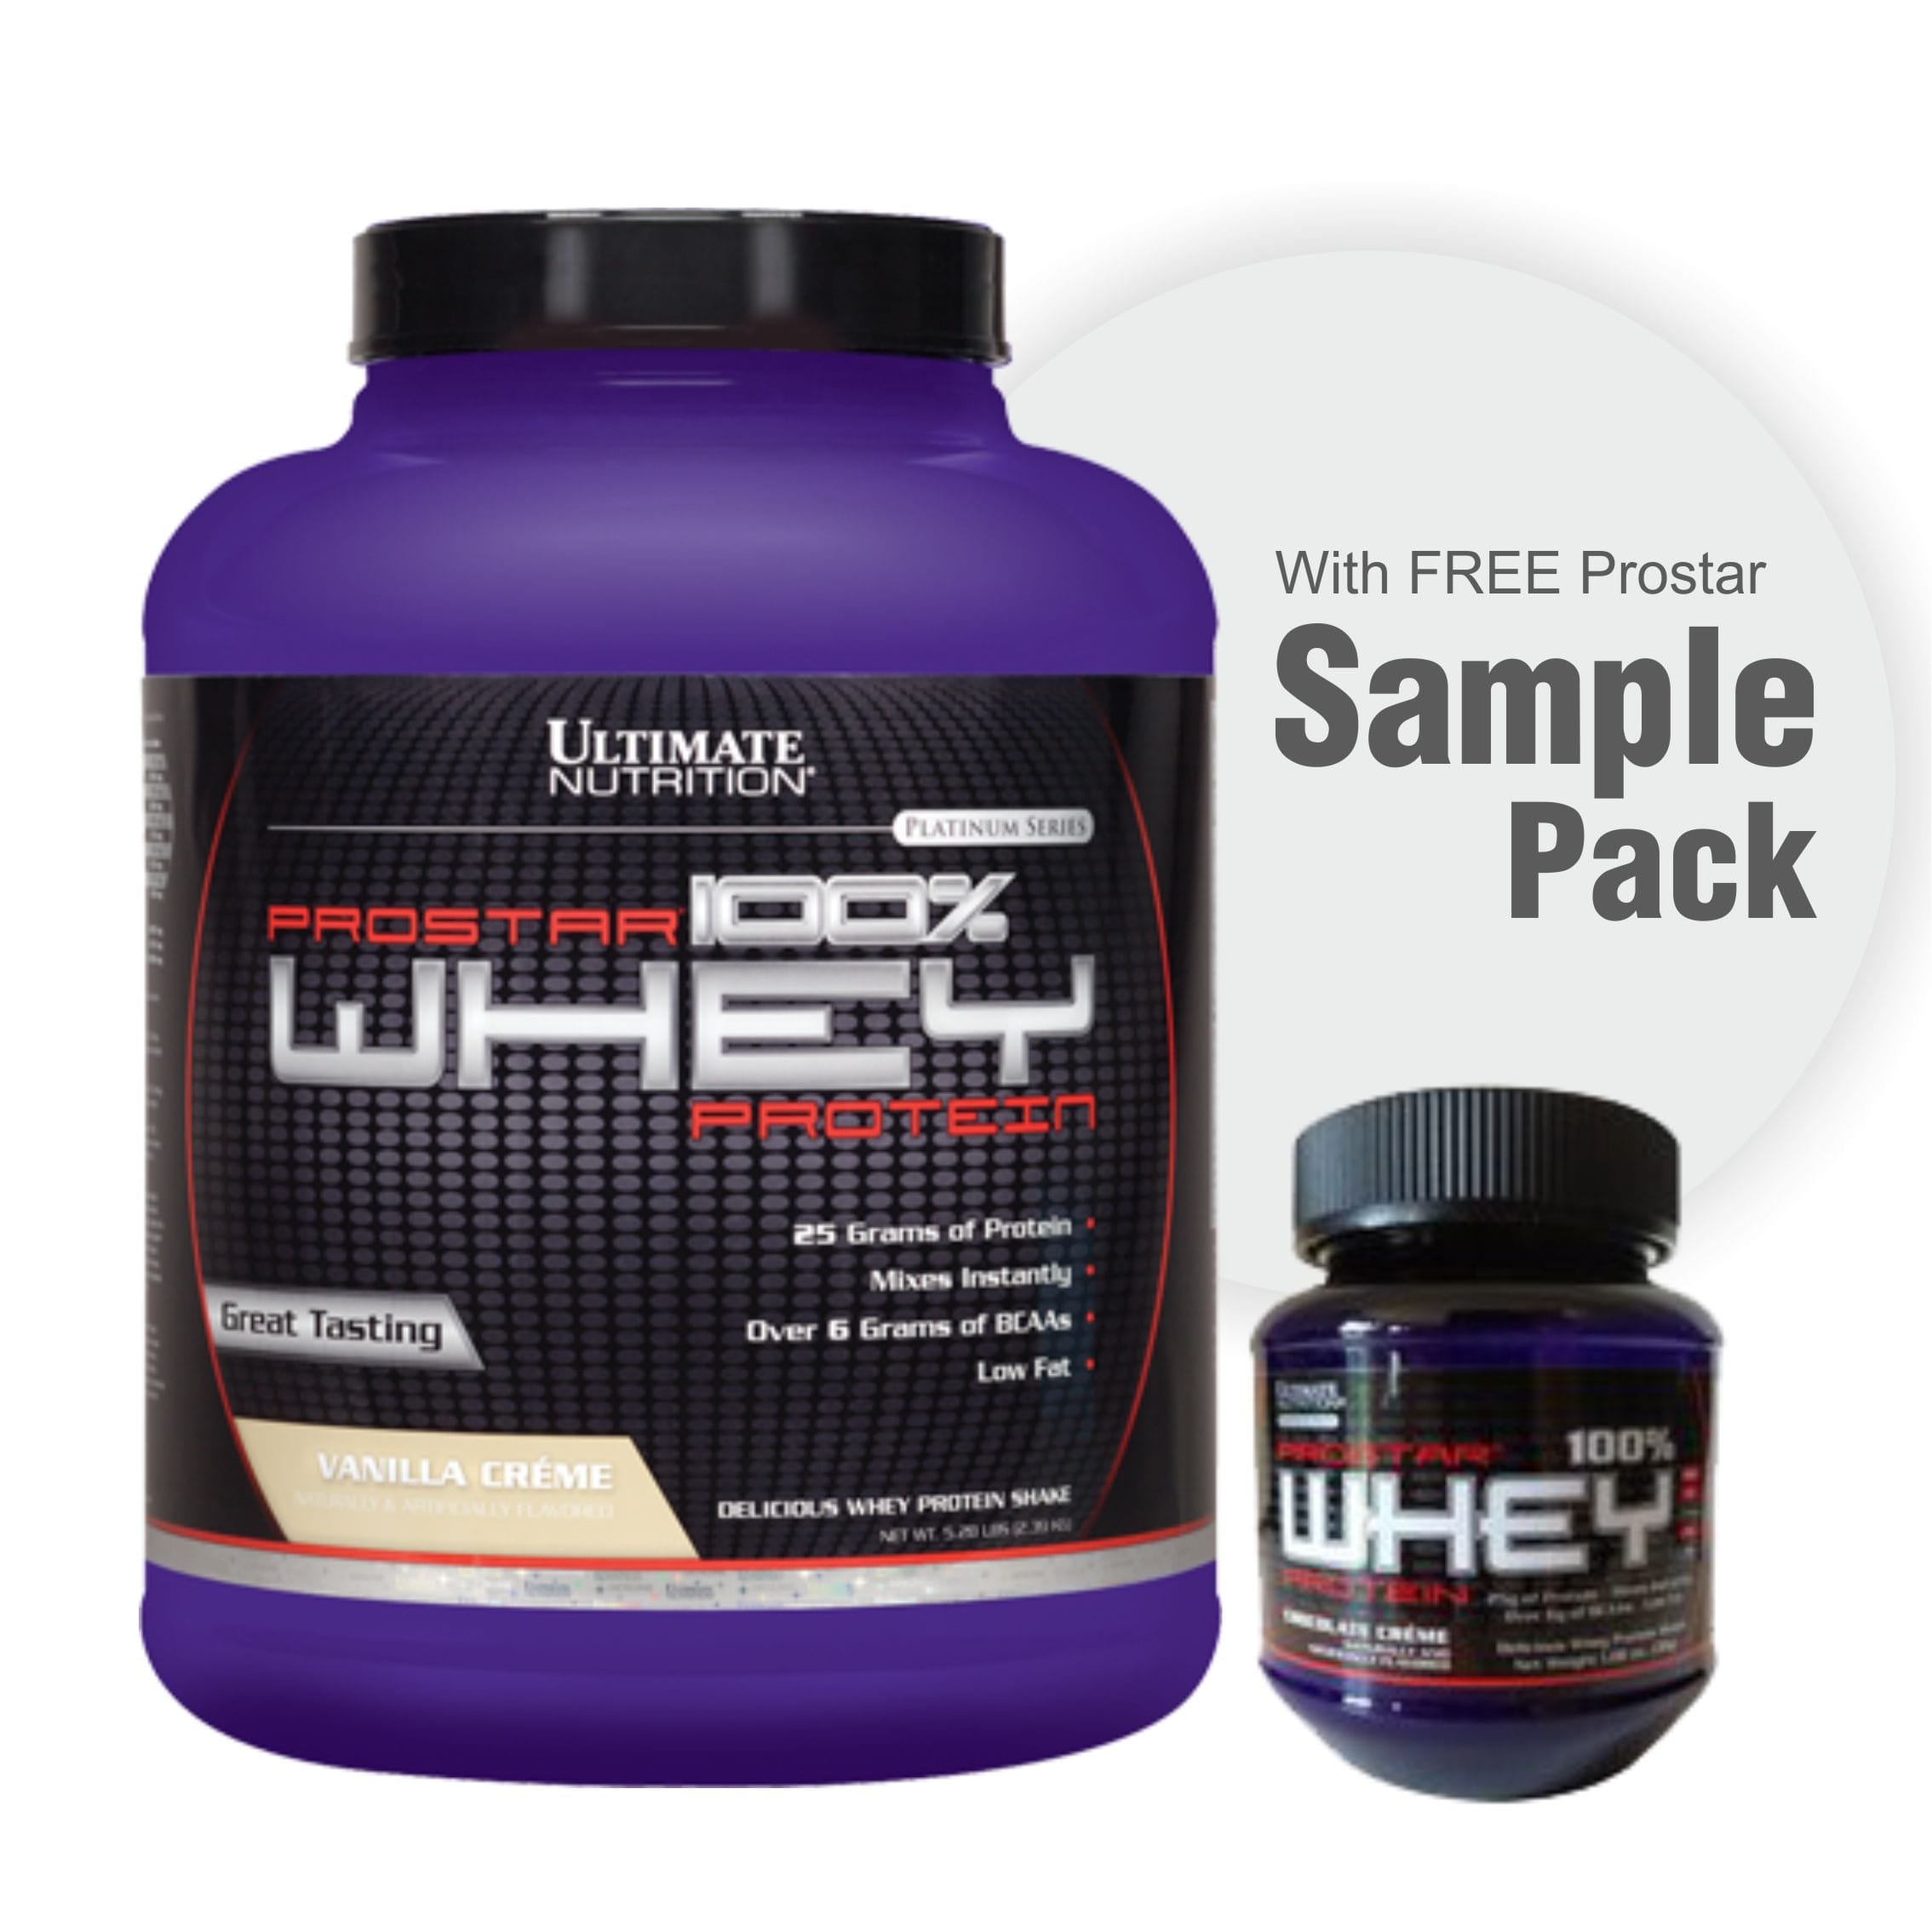 Ultimate Nutrition Whey Protein review